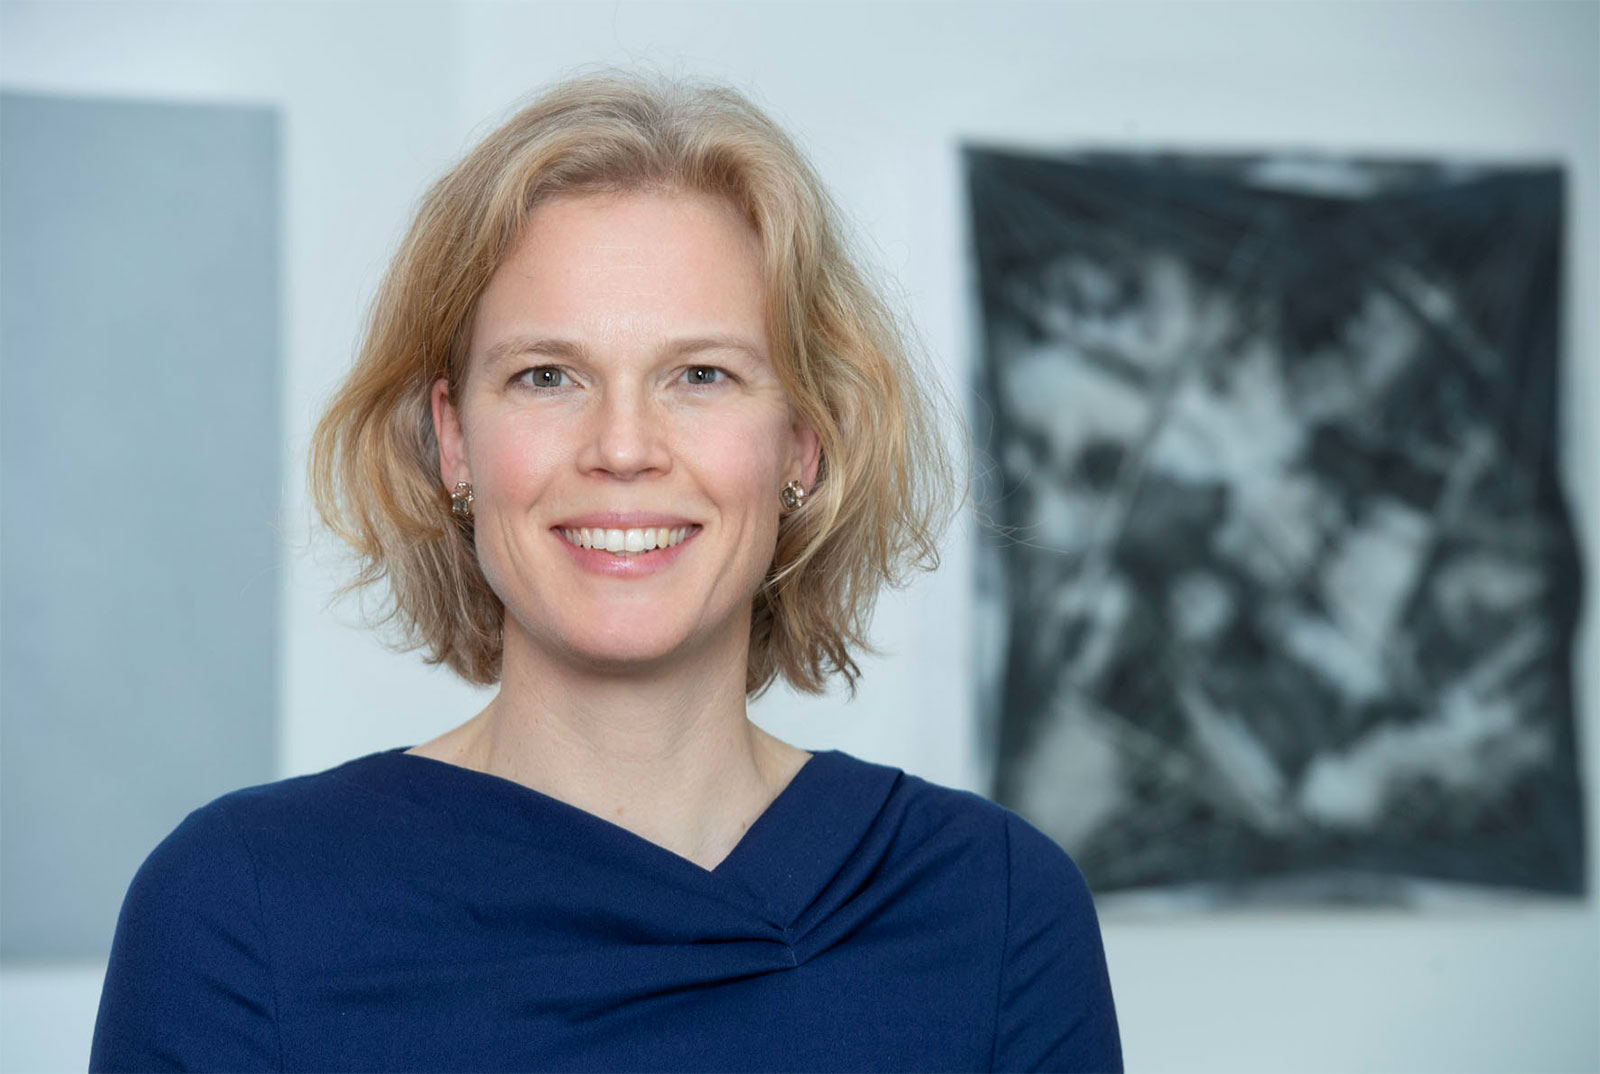 Prof. Katharina Hölzle joins the institute management at Fraunhofer IAO